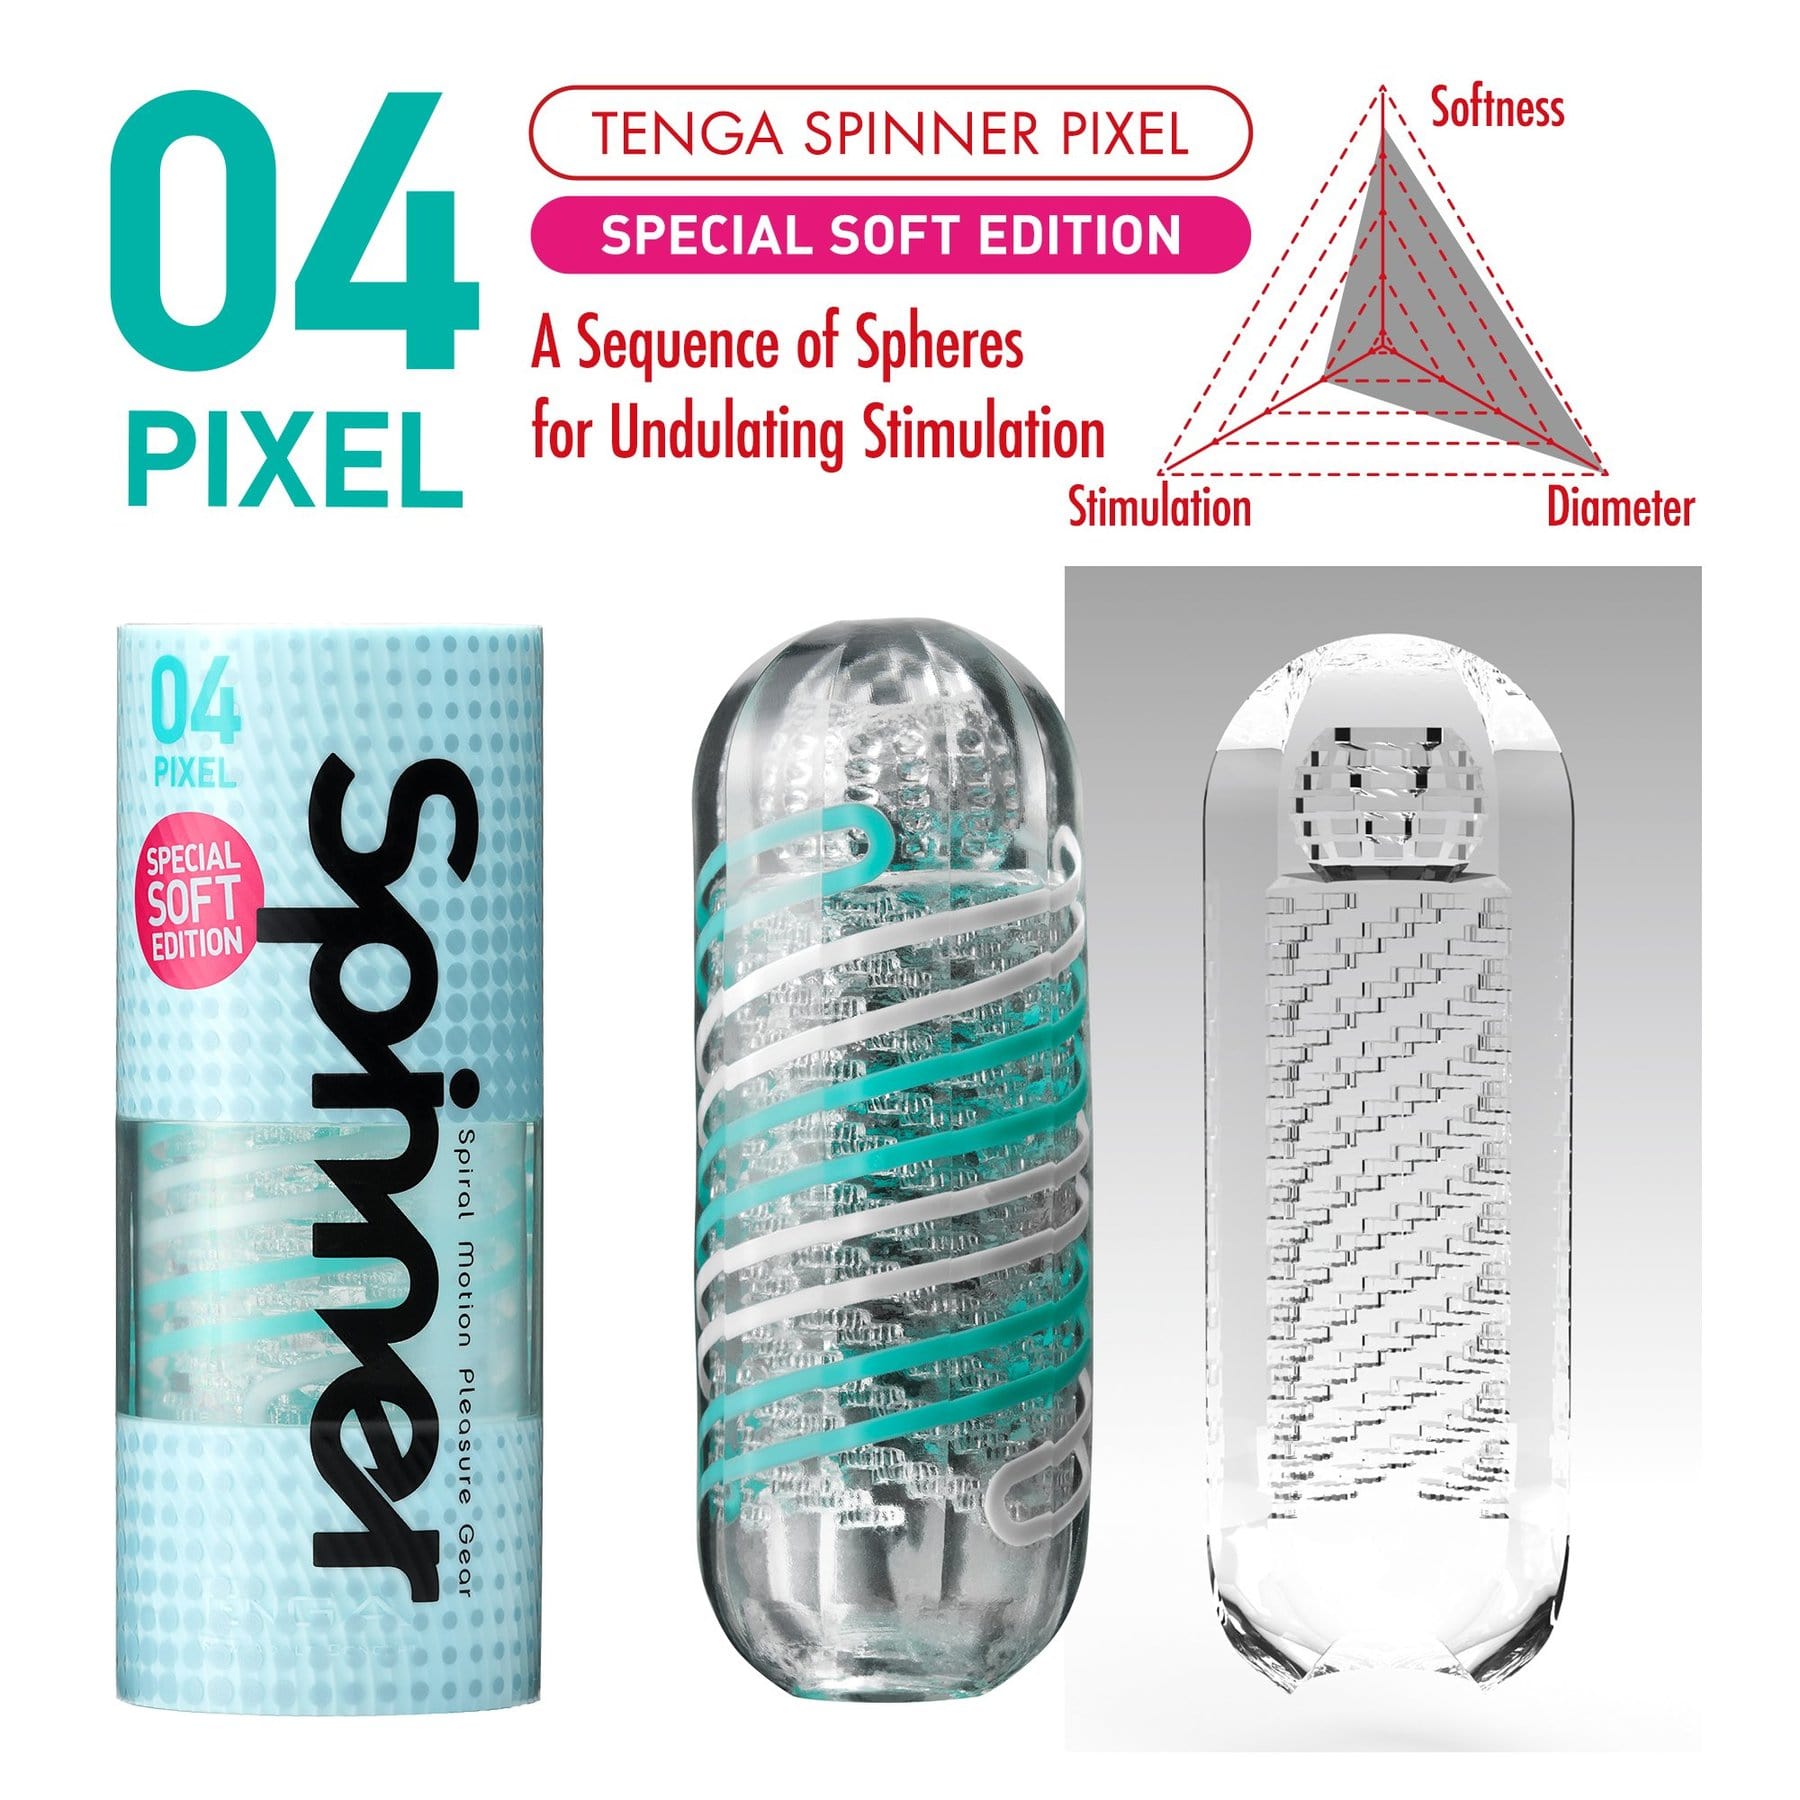 Tenga Spinner Special Soft Edition - 04 PIXEL - Thorn & Feather Sex Toy Canada